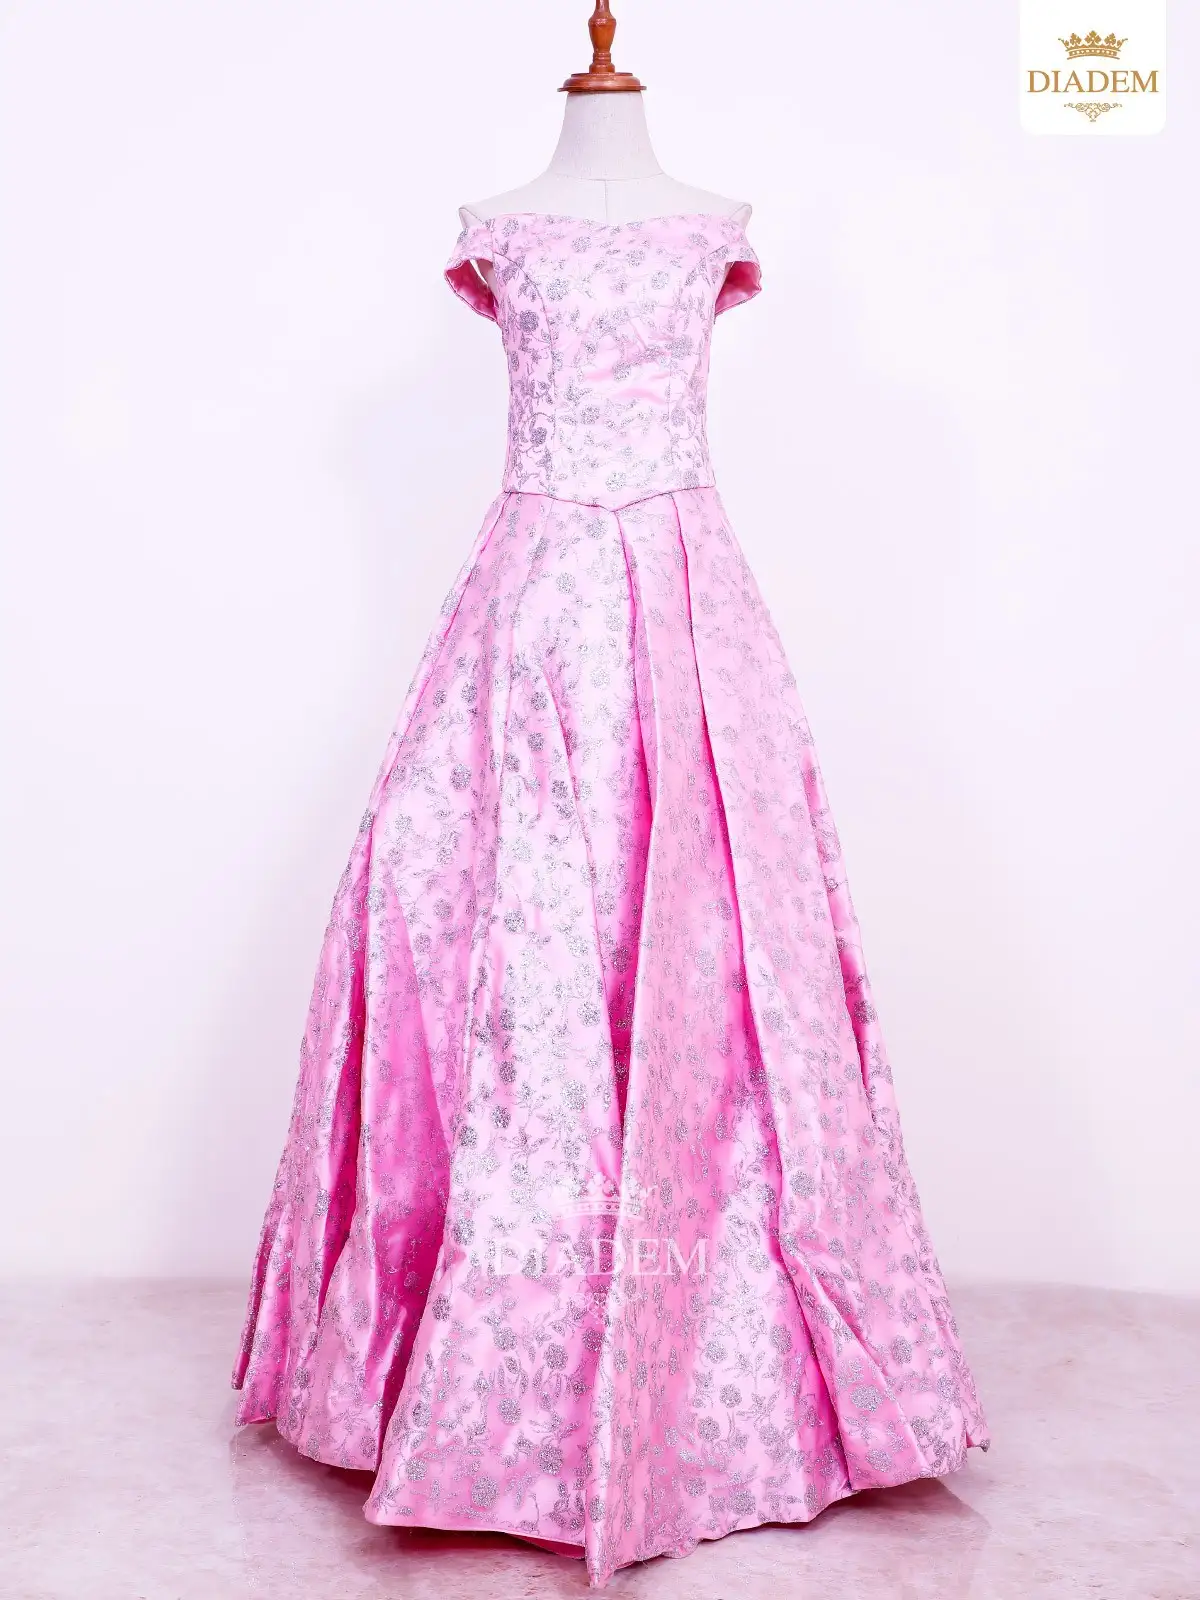 Valentine Pink Bridal Gown Embellished in Floral Design Stones and Beads